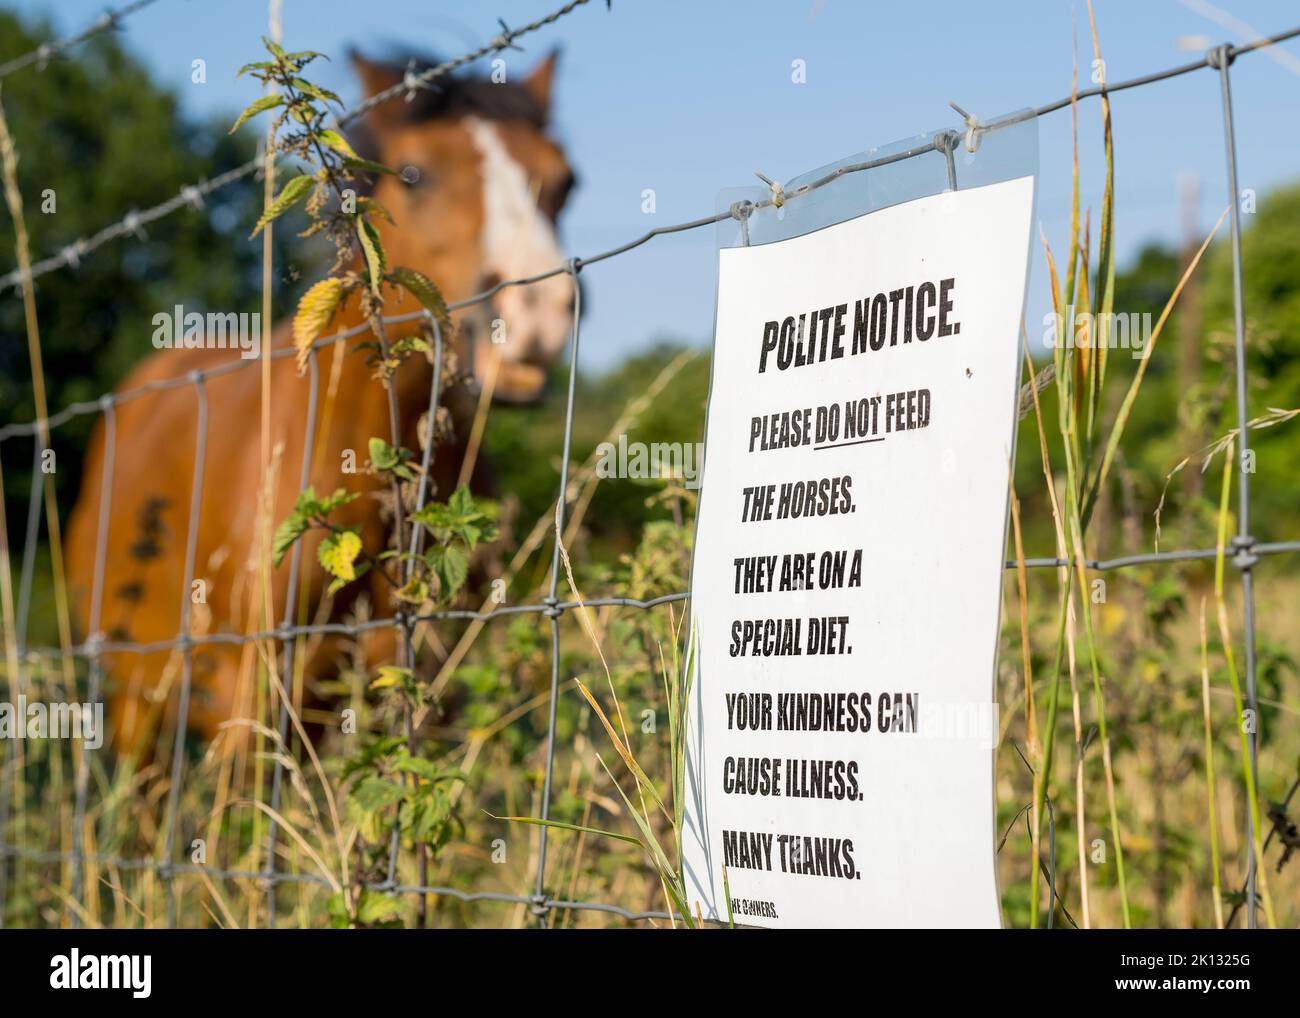 Polite notice sign, do not feed the horses placed on a wire fence outside a paddock area where you can see a horse. Stock Photo